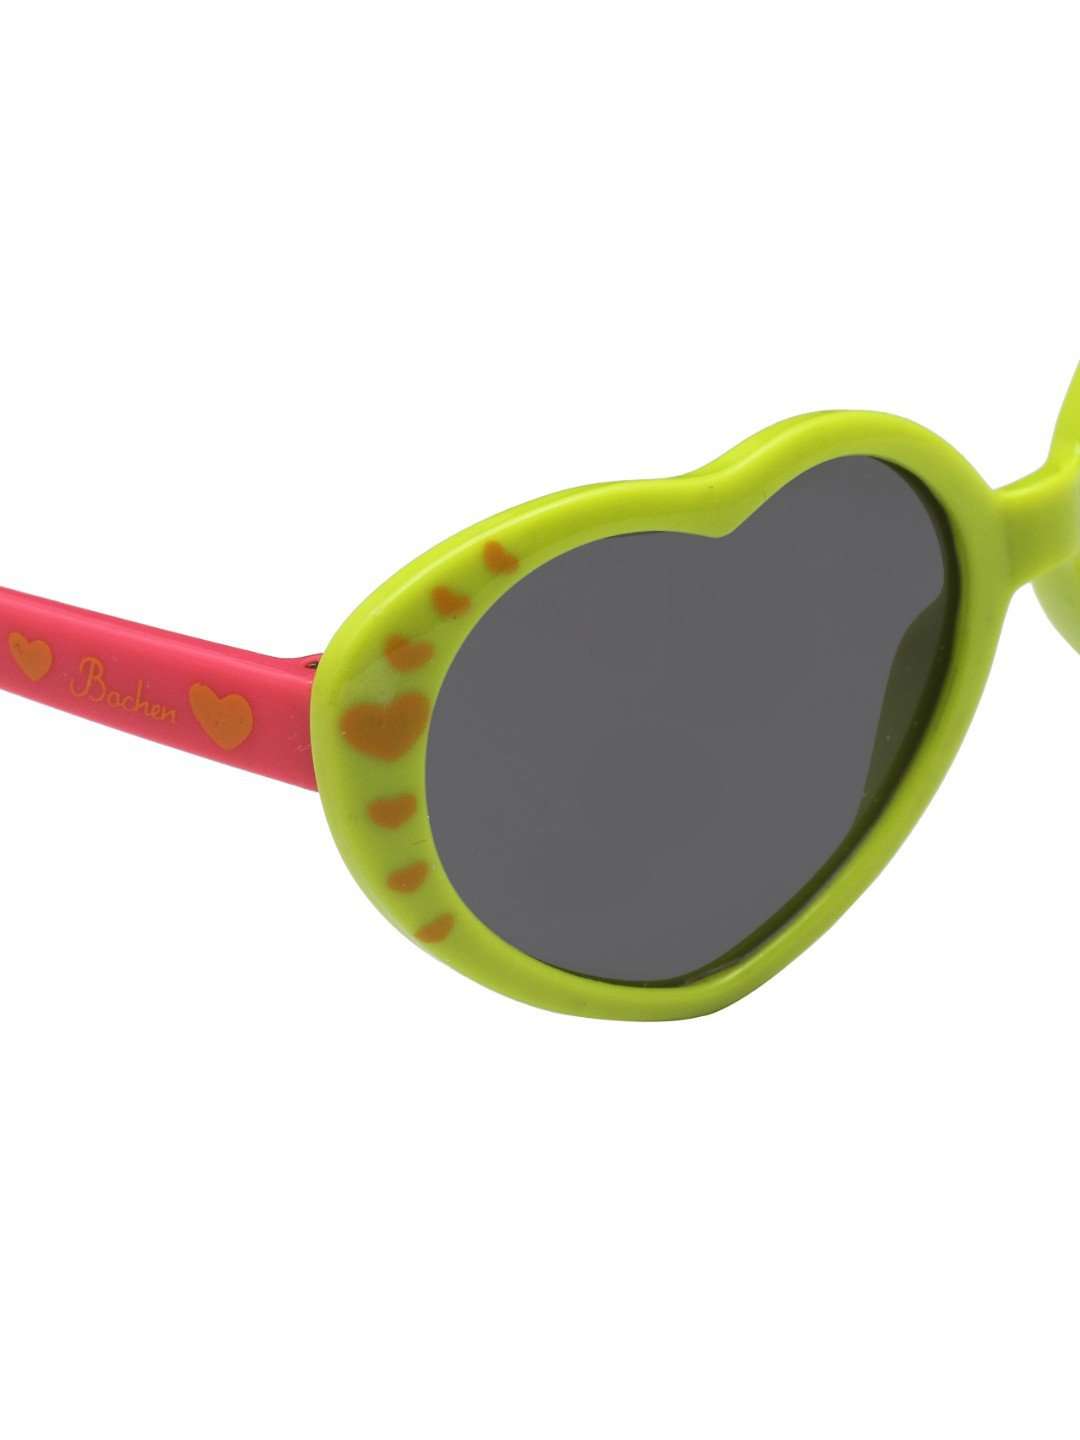 Stol'n Kids Green and Pink Heart Sunglasses - SWHF